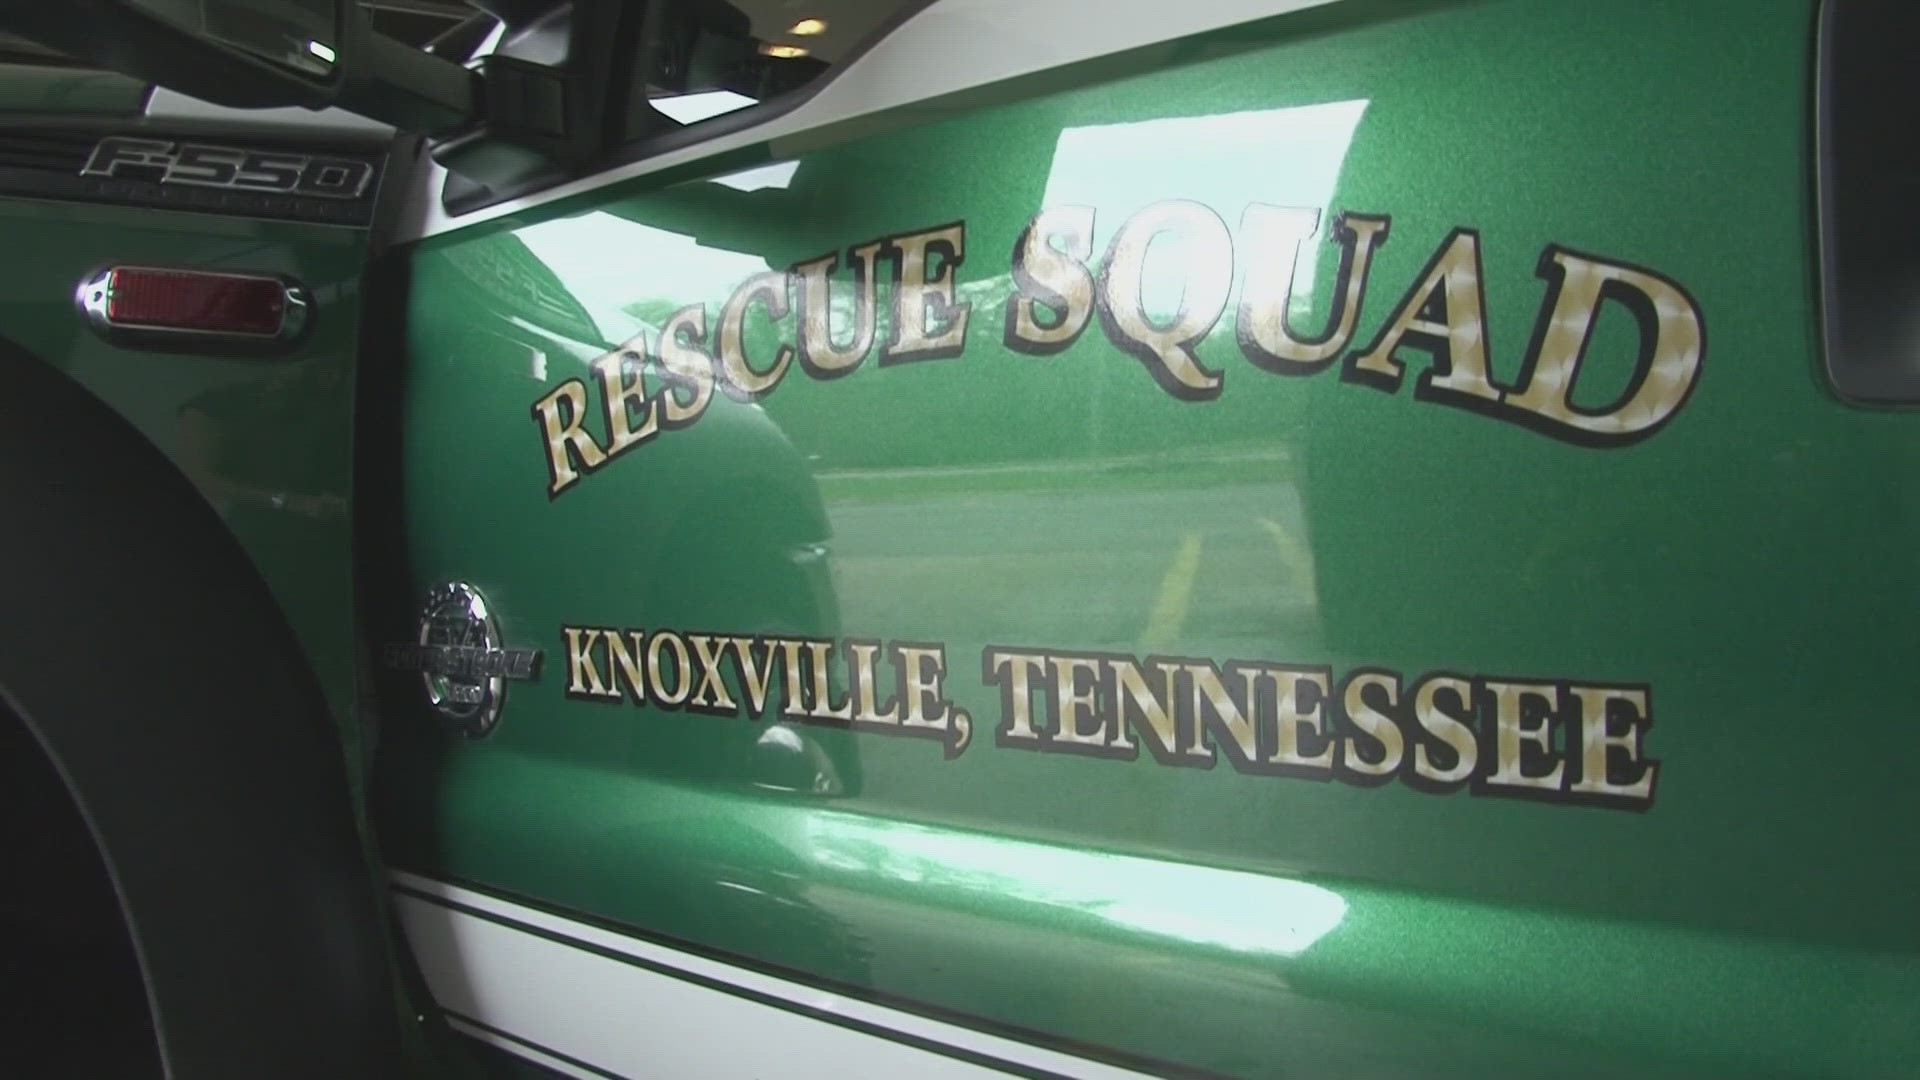 The Rescue Squad leadership said in a board meeting this May, they believe the former employee misused tens of thousands of dollars, at least.